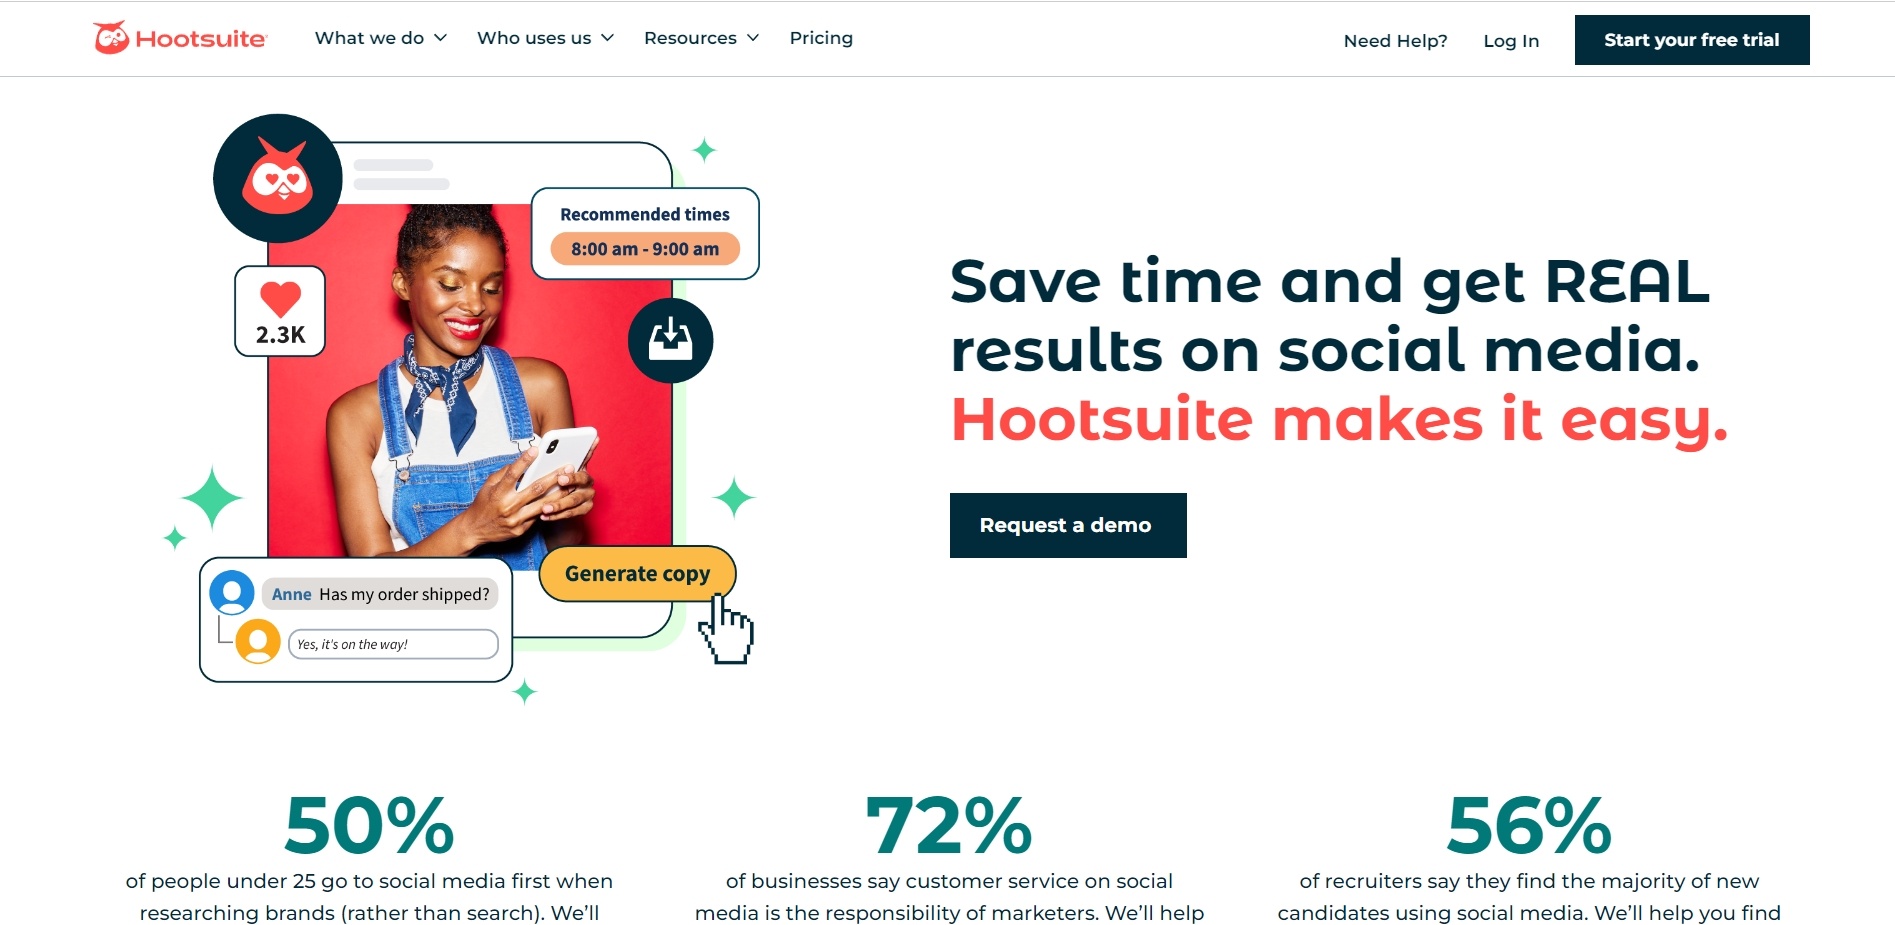 Hootsuite provides analytics tools that gather data from multiple social accounts including LinkedIn